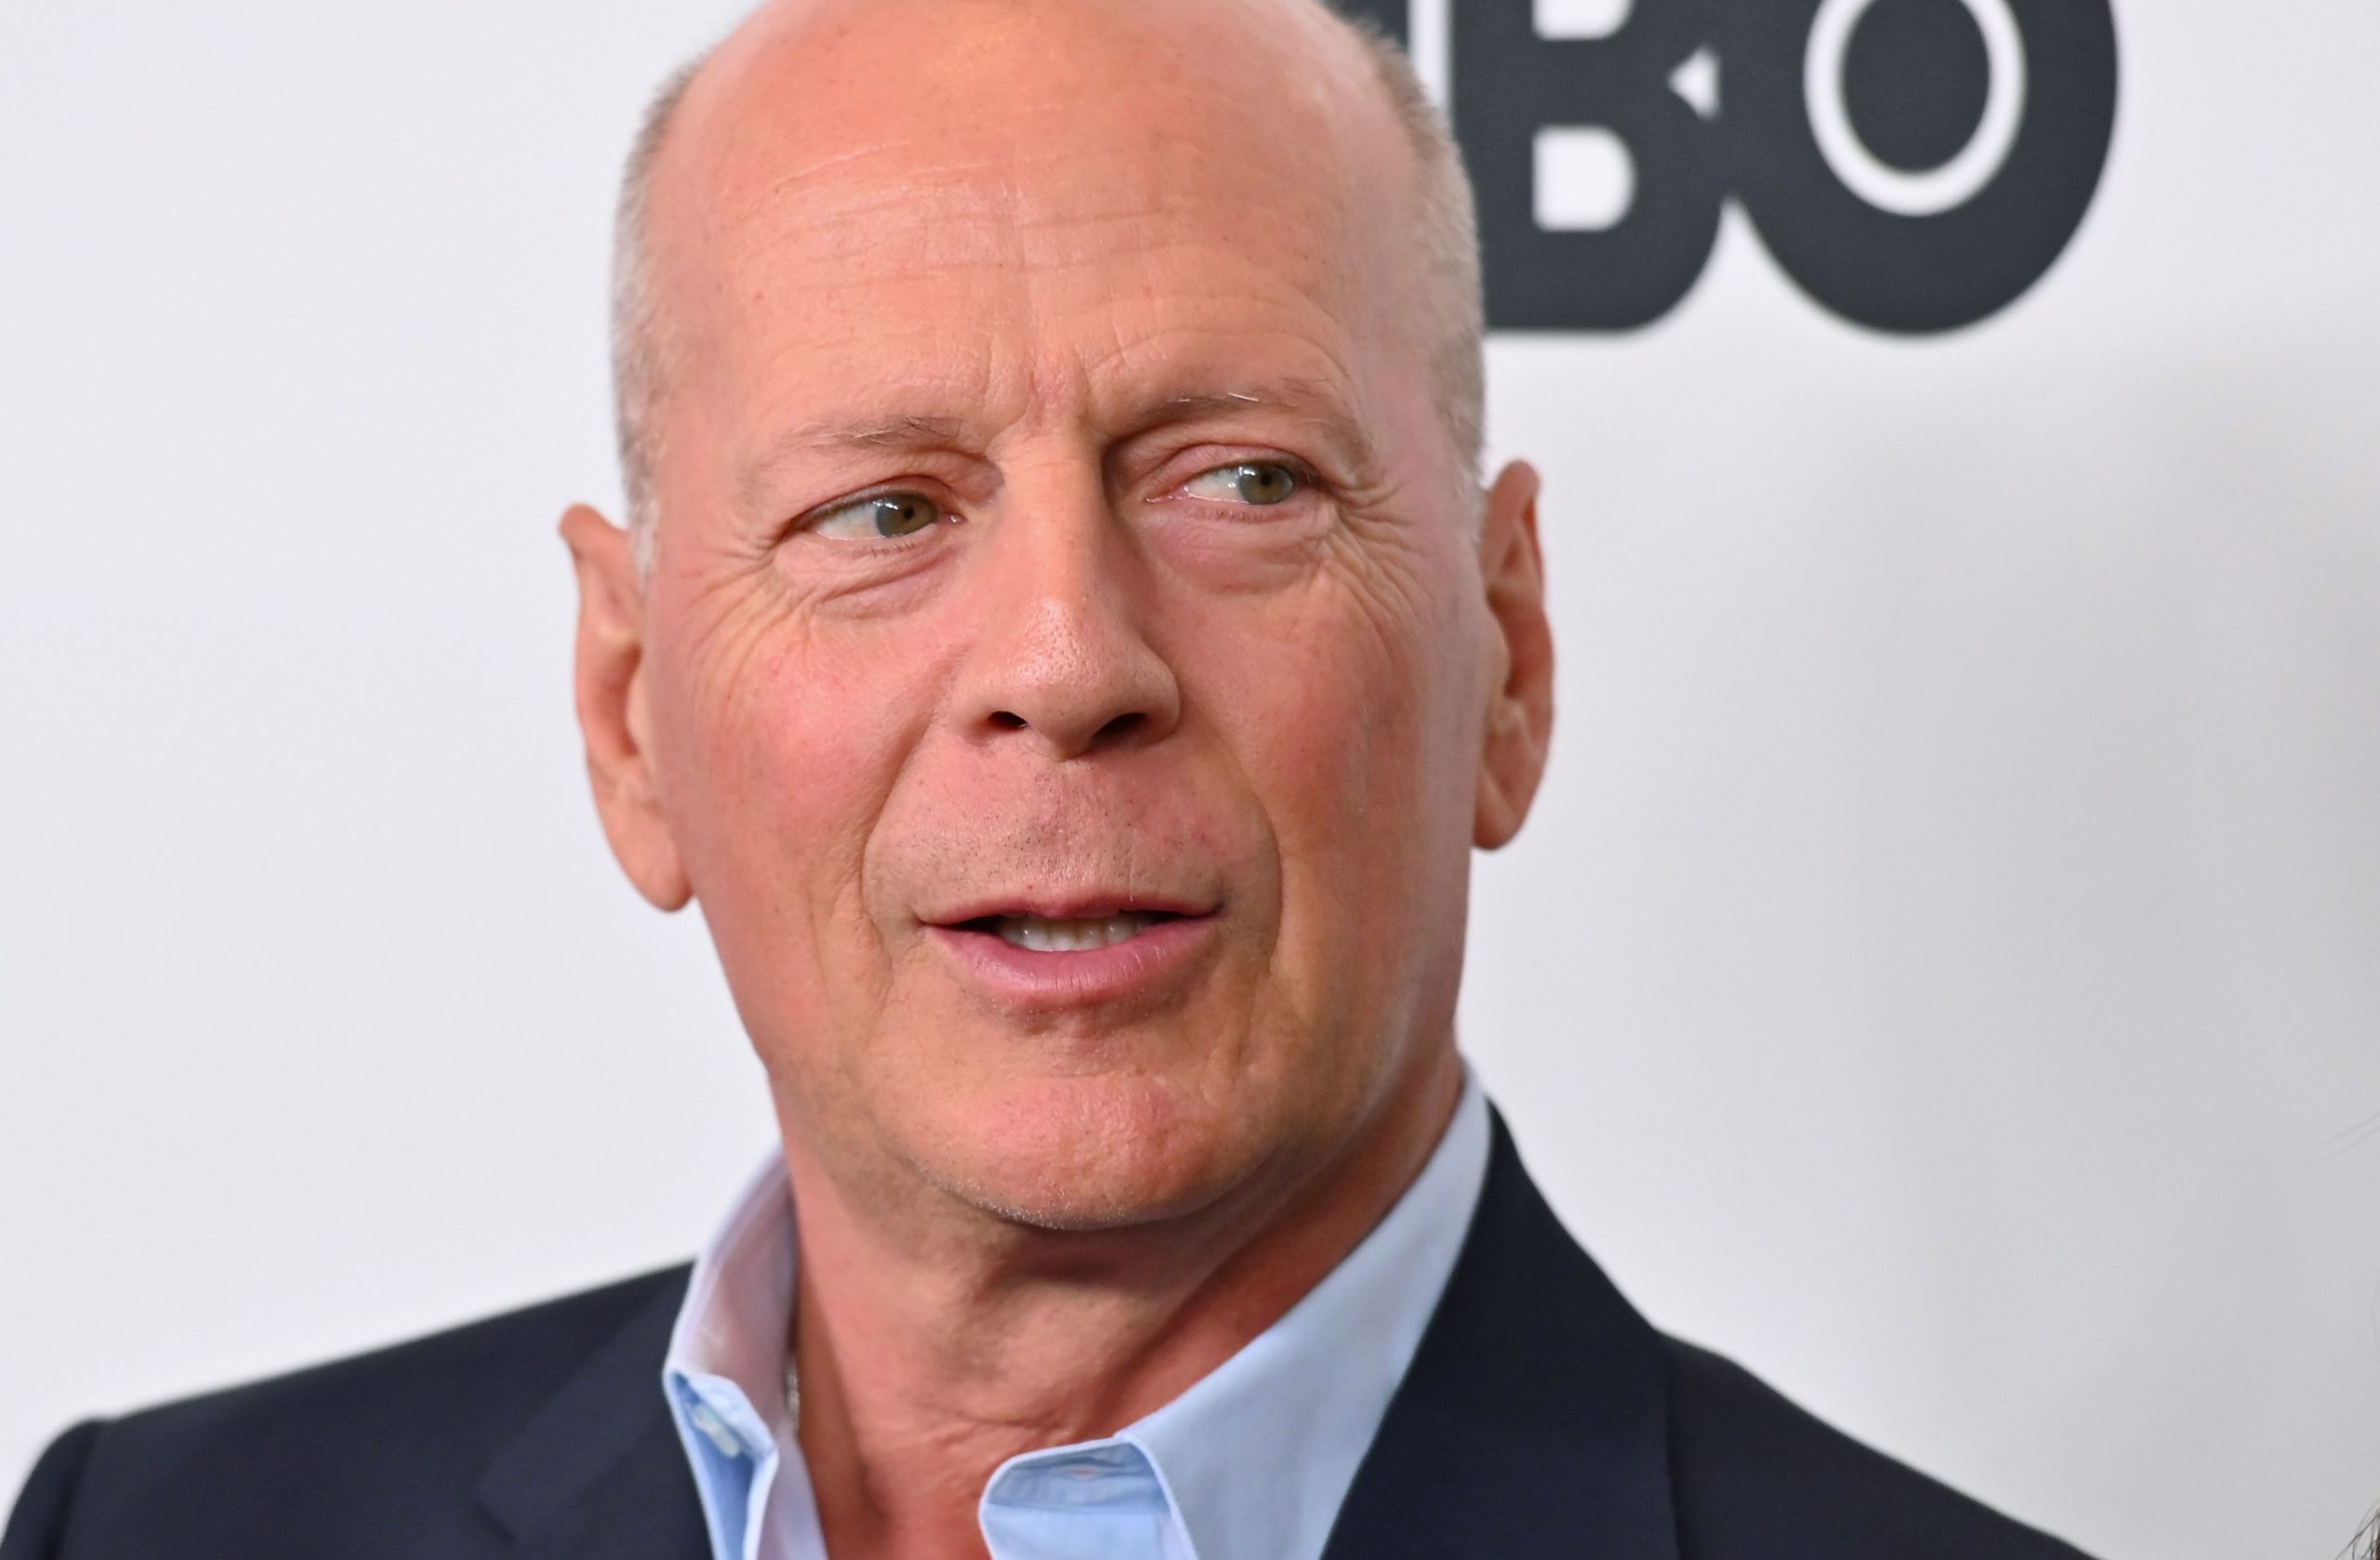 ‘Error in judgment’: Actor Bruce Willis after facing backlash for not wearing mask in public